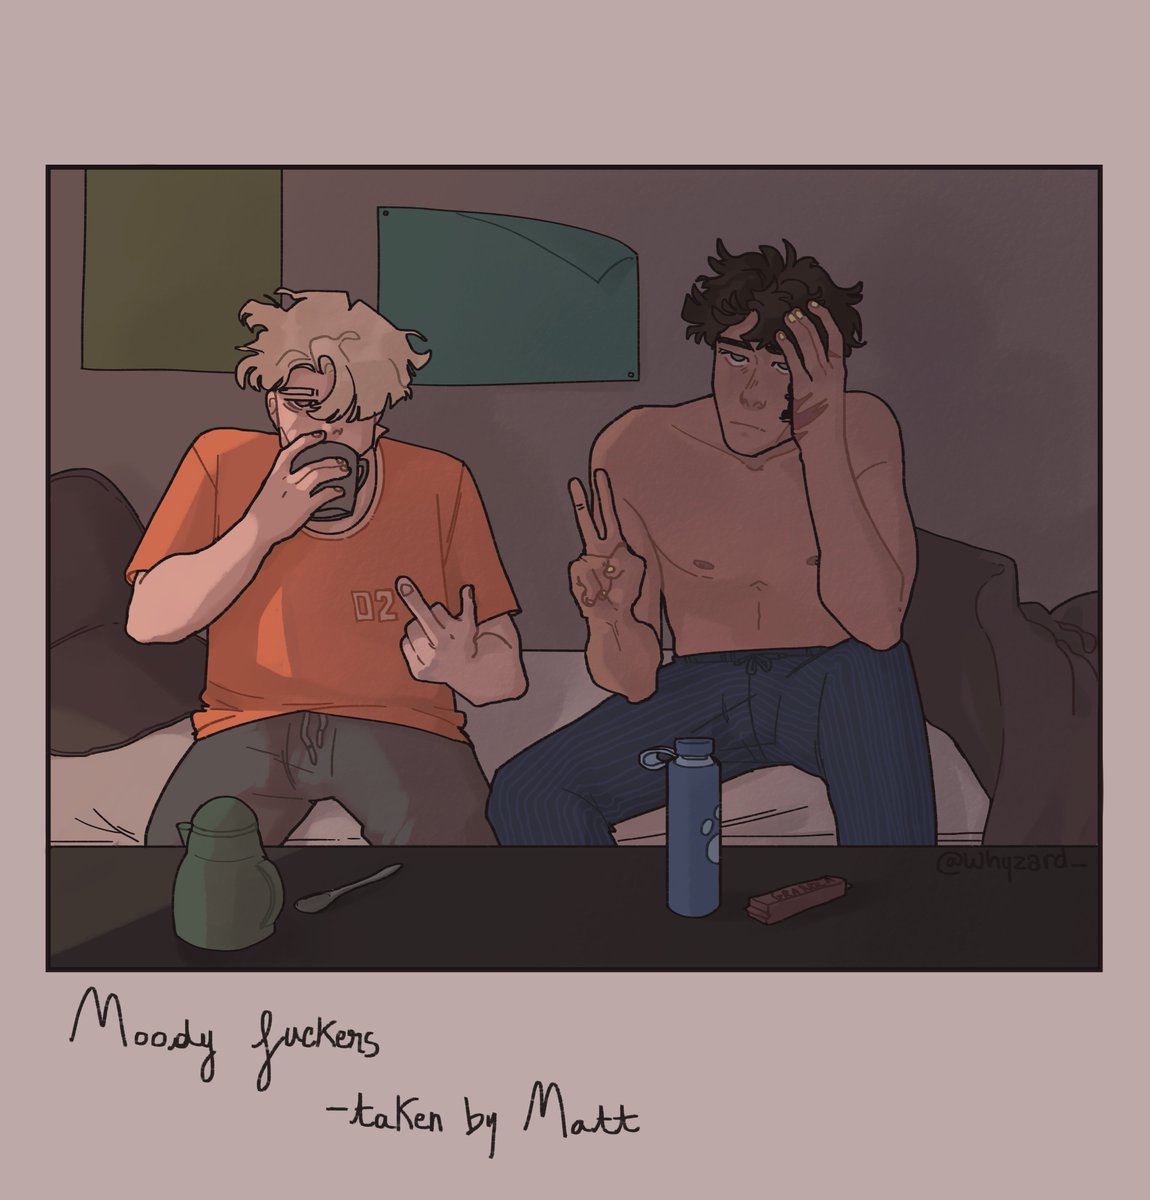 picture on the foxe's wall #aftg #allforthegame #kevaaron #kevinday #aaronminyard